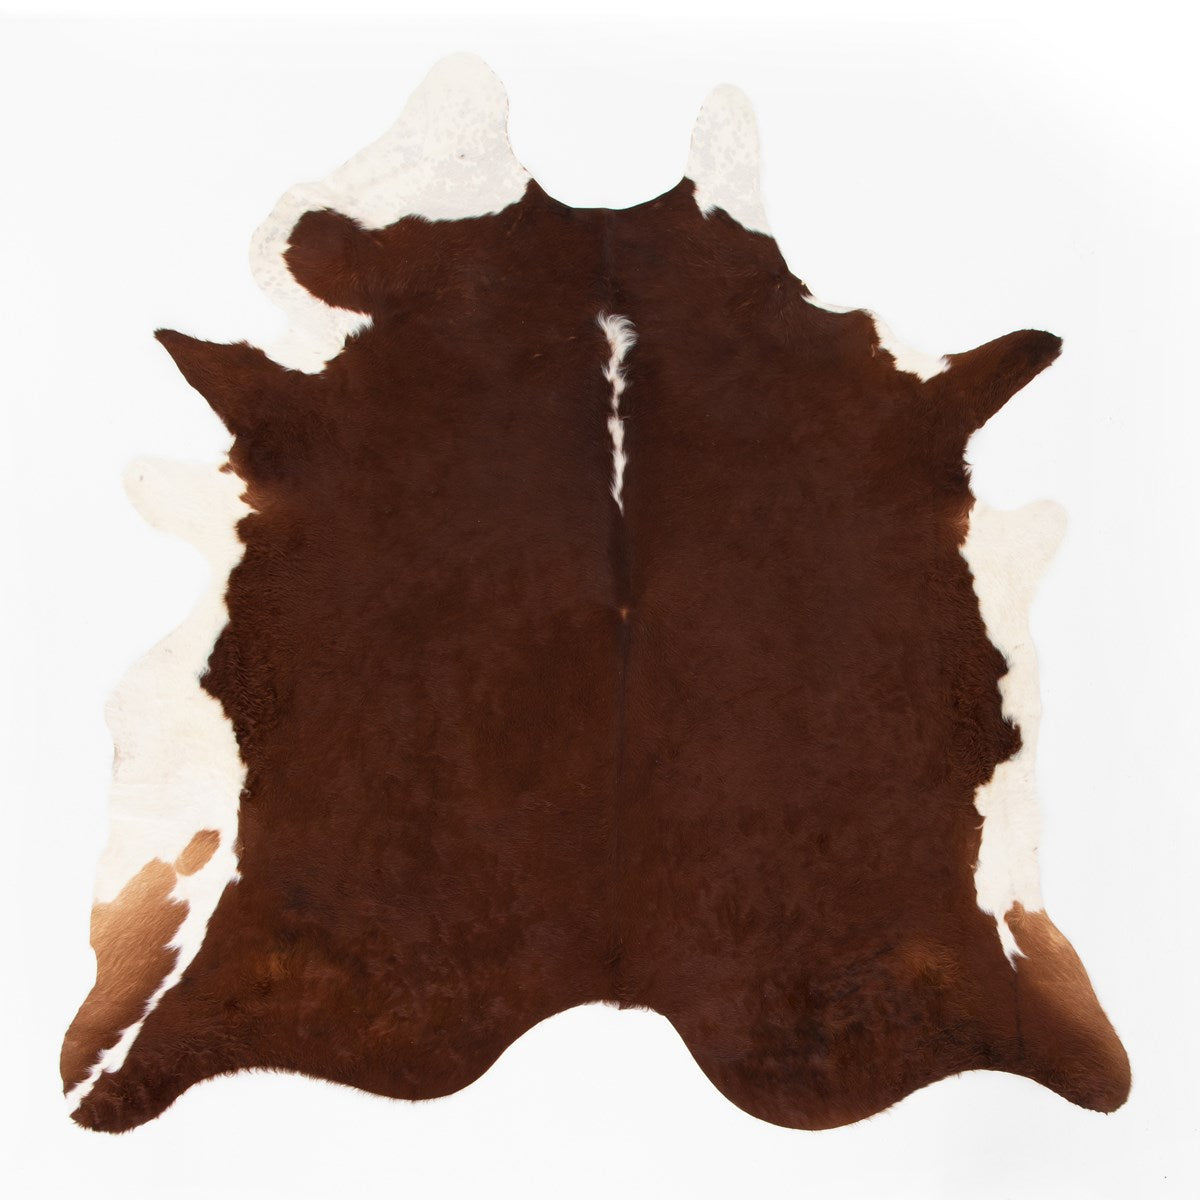 Load image into Gallery viewer, Cardin Cowhide Rug, Brown And White Cardin Cowhide Rug Four Hands     Four Hands, Burke Decor, Mid Century Modern Furniture, Old Bones Furniture Company, Old Bones Co, Modern Mid Century, Designer Furniture, https://www.oldbonesco.com/
